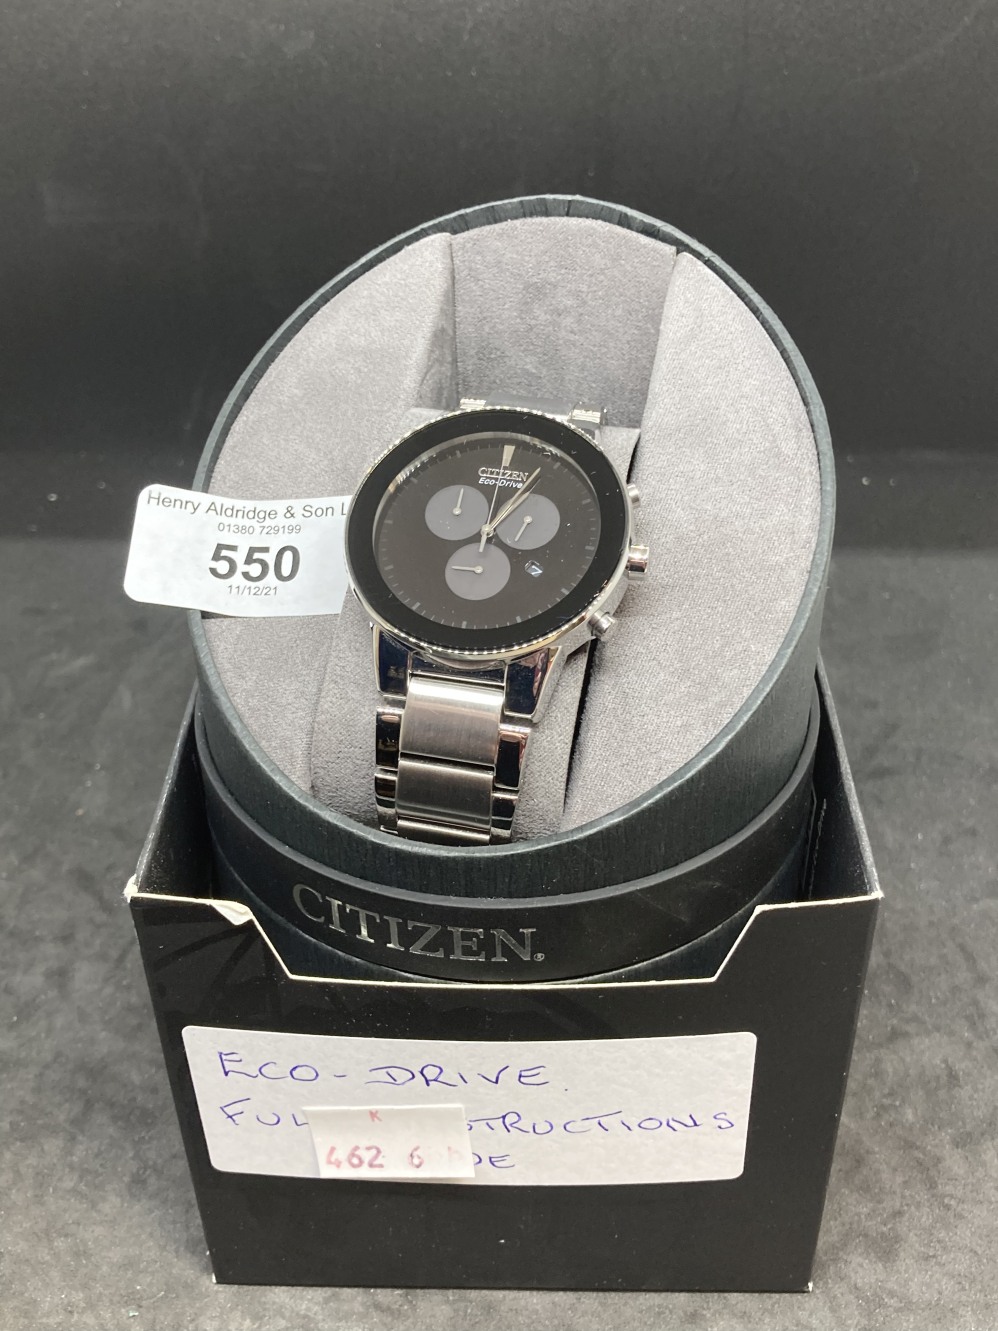 Watches: Citizen Axiom Eco-Drive wristwatch, box, papers and purchase receipt.